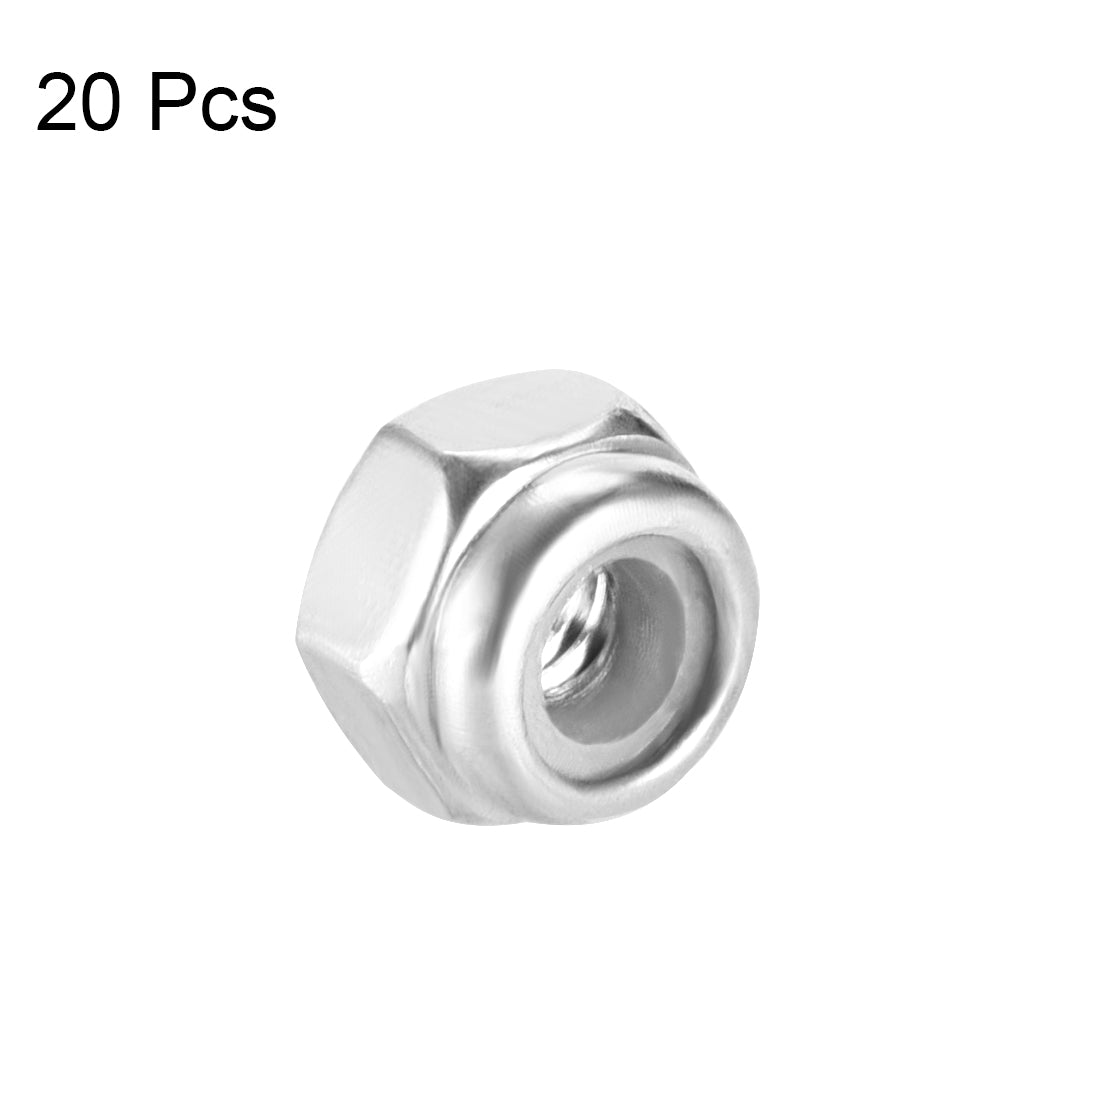 uxcell Uxcell M2.5 x 0.45mm Nylon Insert Hex Lock Nuts, 304 Stainless Steel, Plain Finish, 20 Pcs